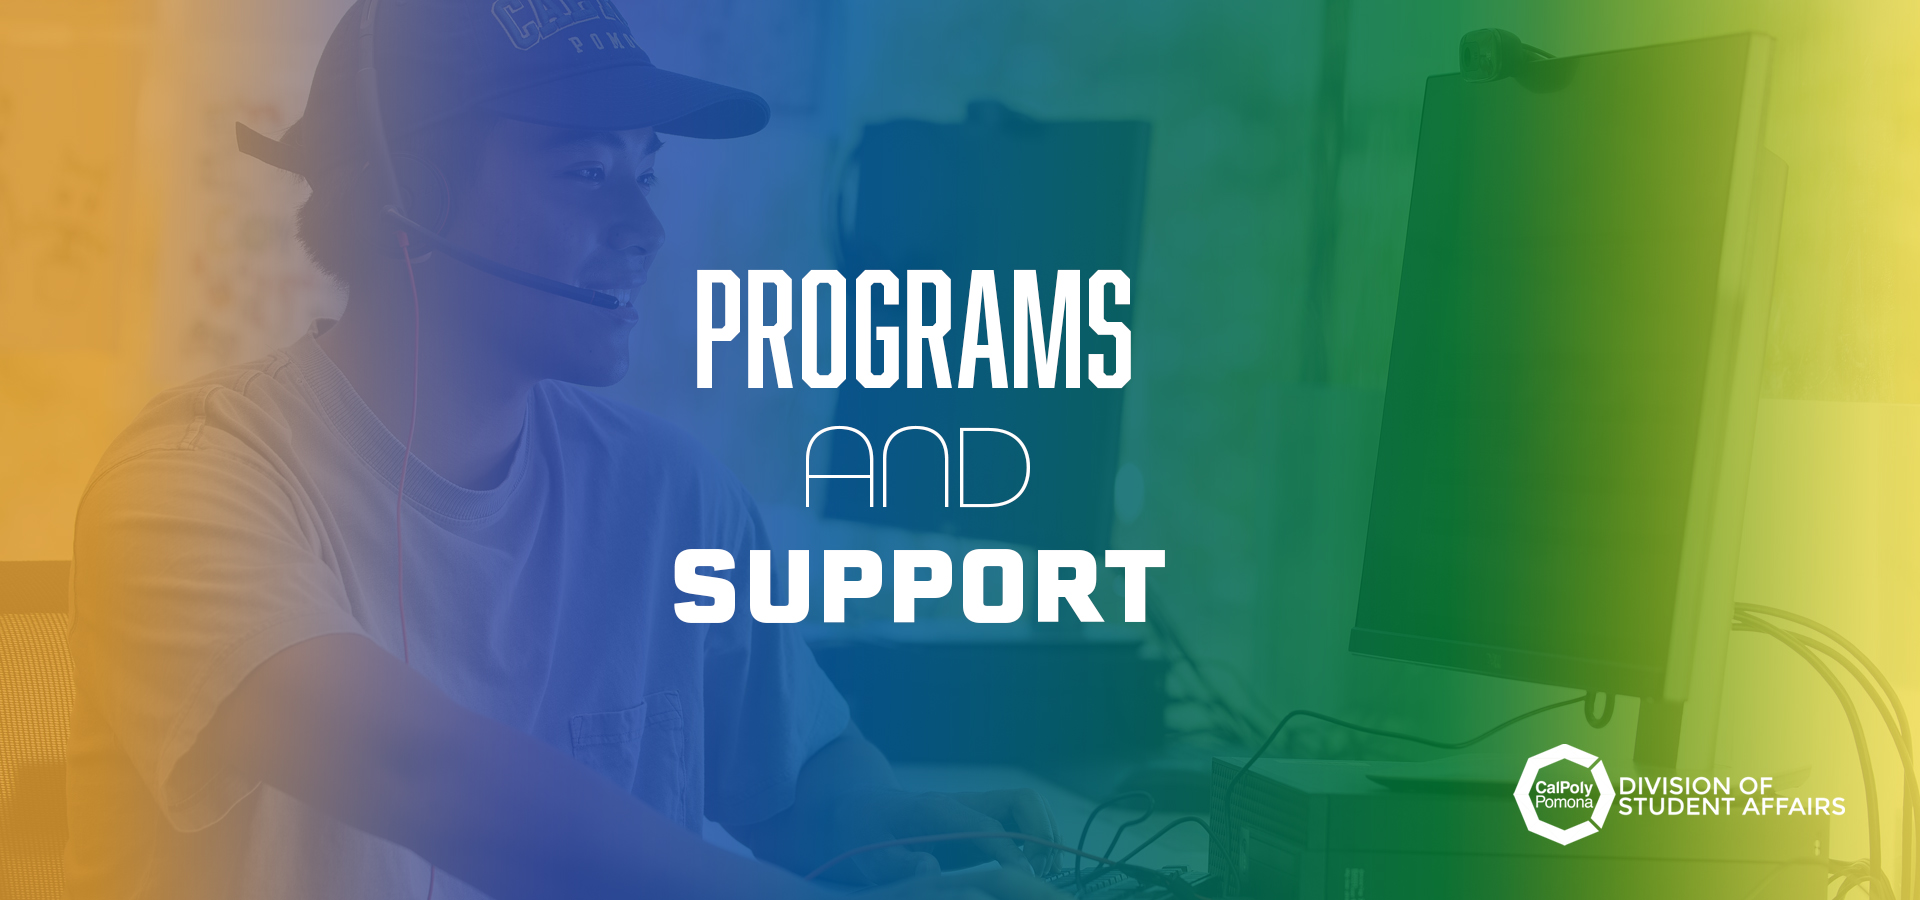 programs and support banner with cpp staff on computer